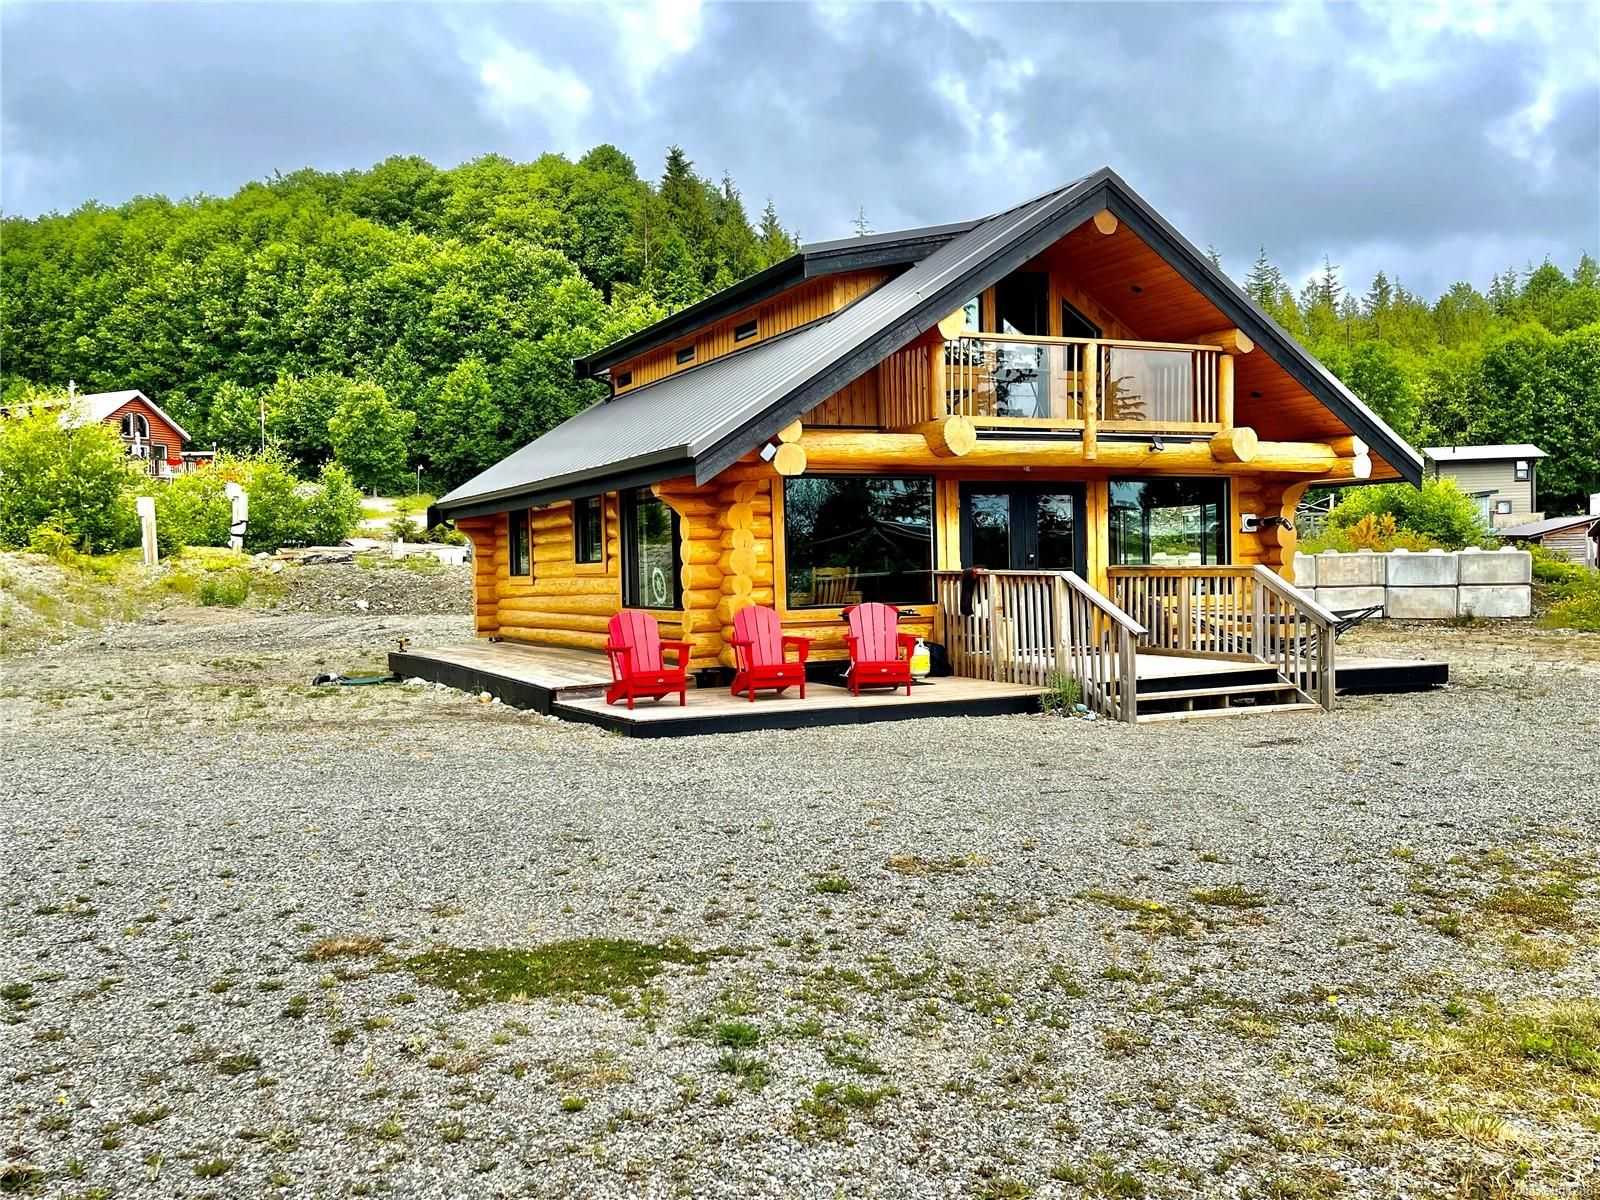 House in Ucluelet, British Columbia 10843850